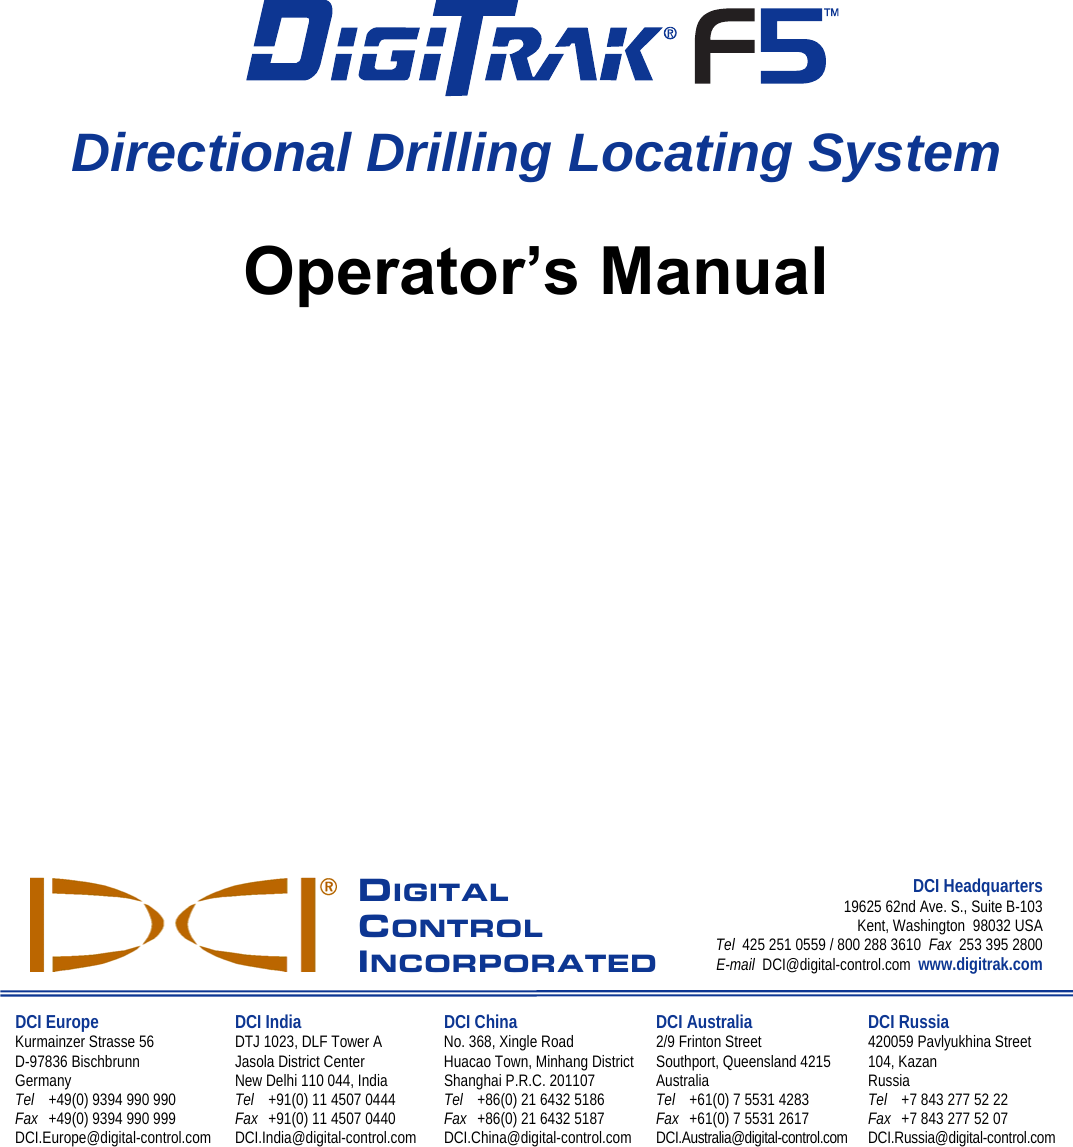                        Directional Drilling Locating System  Operator’s Manual                   DIGITAL CONTROL INCORPORATEDDCI Headquarters19625 62nd Ave. S., Suite B-103 Kent, Washington  98032 USA Tel  425 251 0559 / 800 288 3610  Fax  253 395 2800 E-mail  DCI@digital-control.com  www.digitrak.com DCI Europe Kurmainzer Strasse 56 D-97836 Bischbrunn  Germany Tel  +49(0) 9394 990 990 Fax  +49(0) 9394 990 999 DCI.Europe@digital-control.com DCI India DTJ 1023, DLF Tower A Jasola District Center New Delhi 110 044, India Tel  +91(0) 11 4507 0444 Fax  +91(0) 11 4507 0440 DCI.India@digital-control.com DCI China No. 368, Xingle Road Huacao Town, Minhang District Shanghai P.R.C. 201107  Tel  +86(0) 21 6432 5186 Fax  +86(0) 21 6432 5187 DCI.China@digital-control.com DCI Australia 2/9 Frinton Street Southport, Queensland 4215 Australia Tel  +61(0) 7 5531 4283 Fax  +61(0) 7 5531 2617 DCI.Australia@digital-control.com DCI Russia 420059 Pavlyukhina Street  104, Kazan Russia Tel  +7 843 277 52 22 Fax  +7 843 277 52 07 DCI.Russia@digital-control.com   